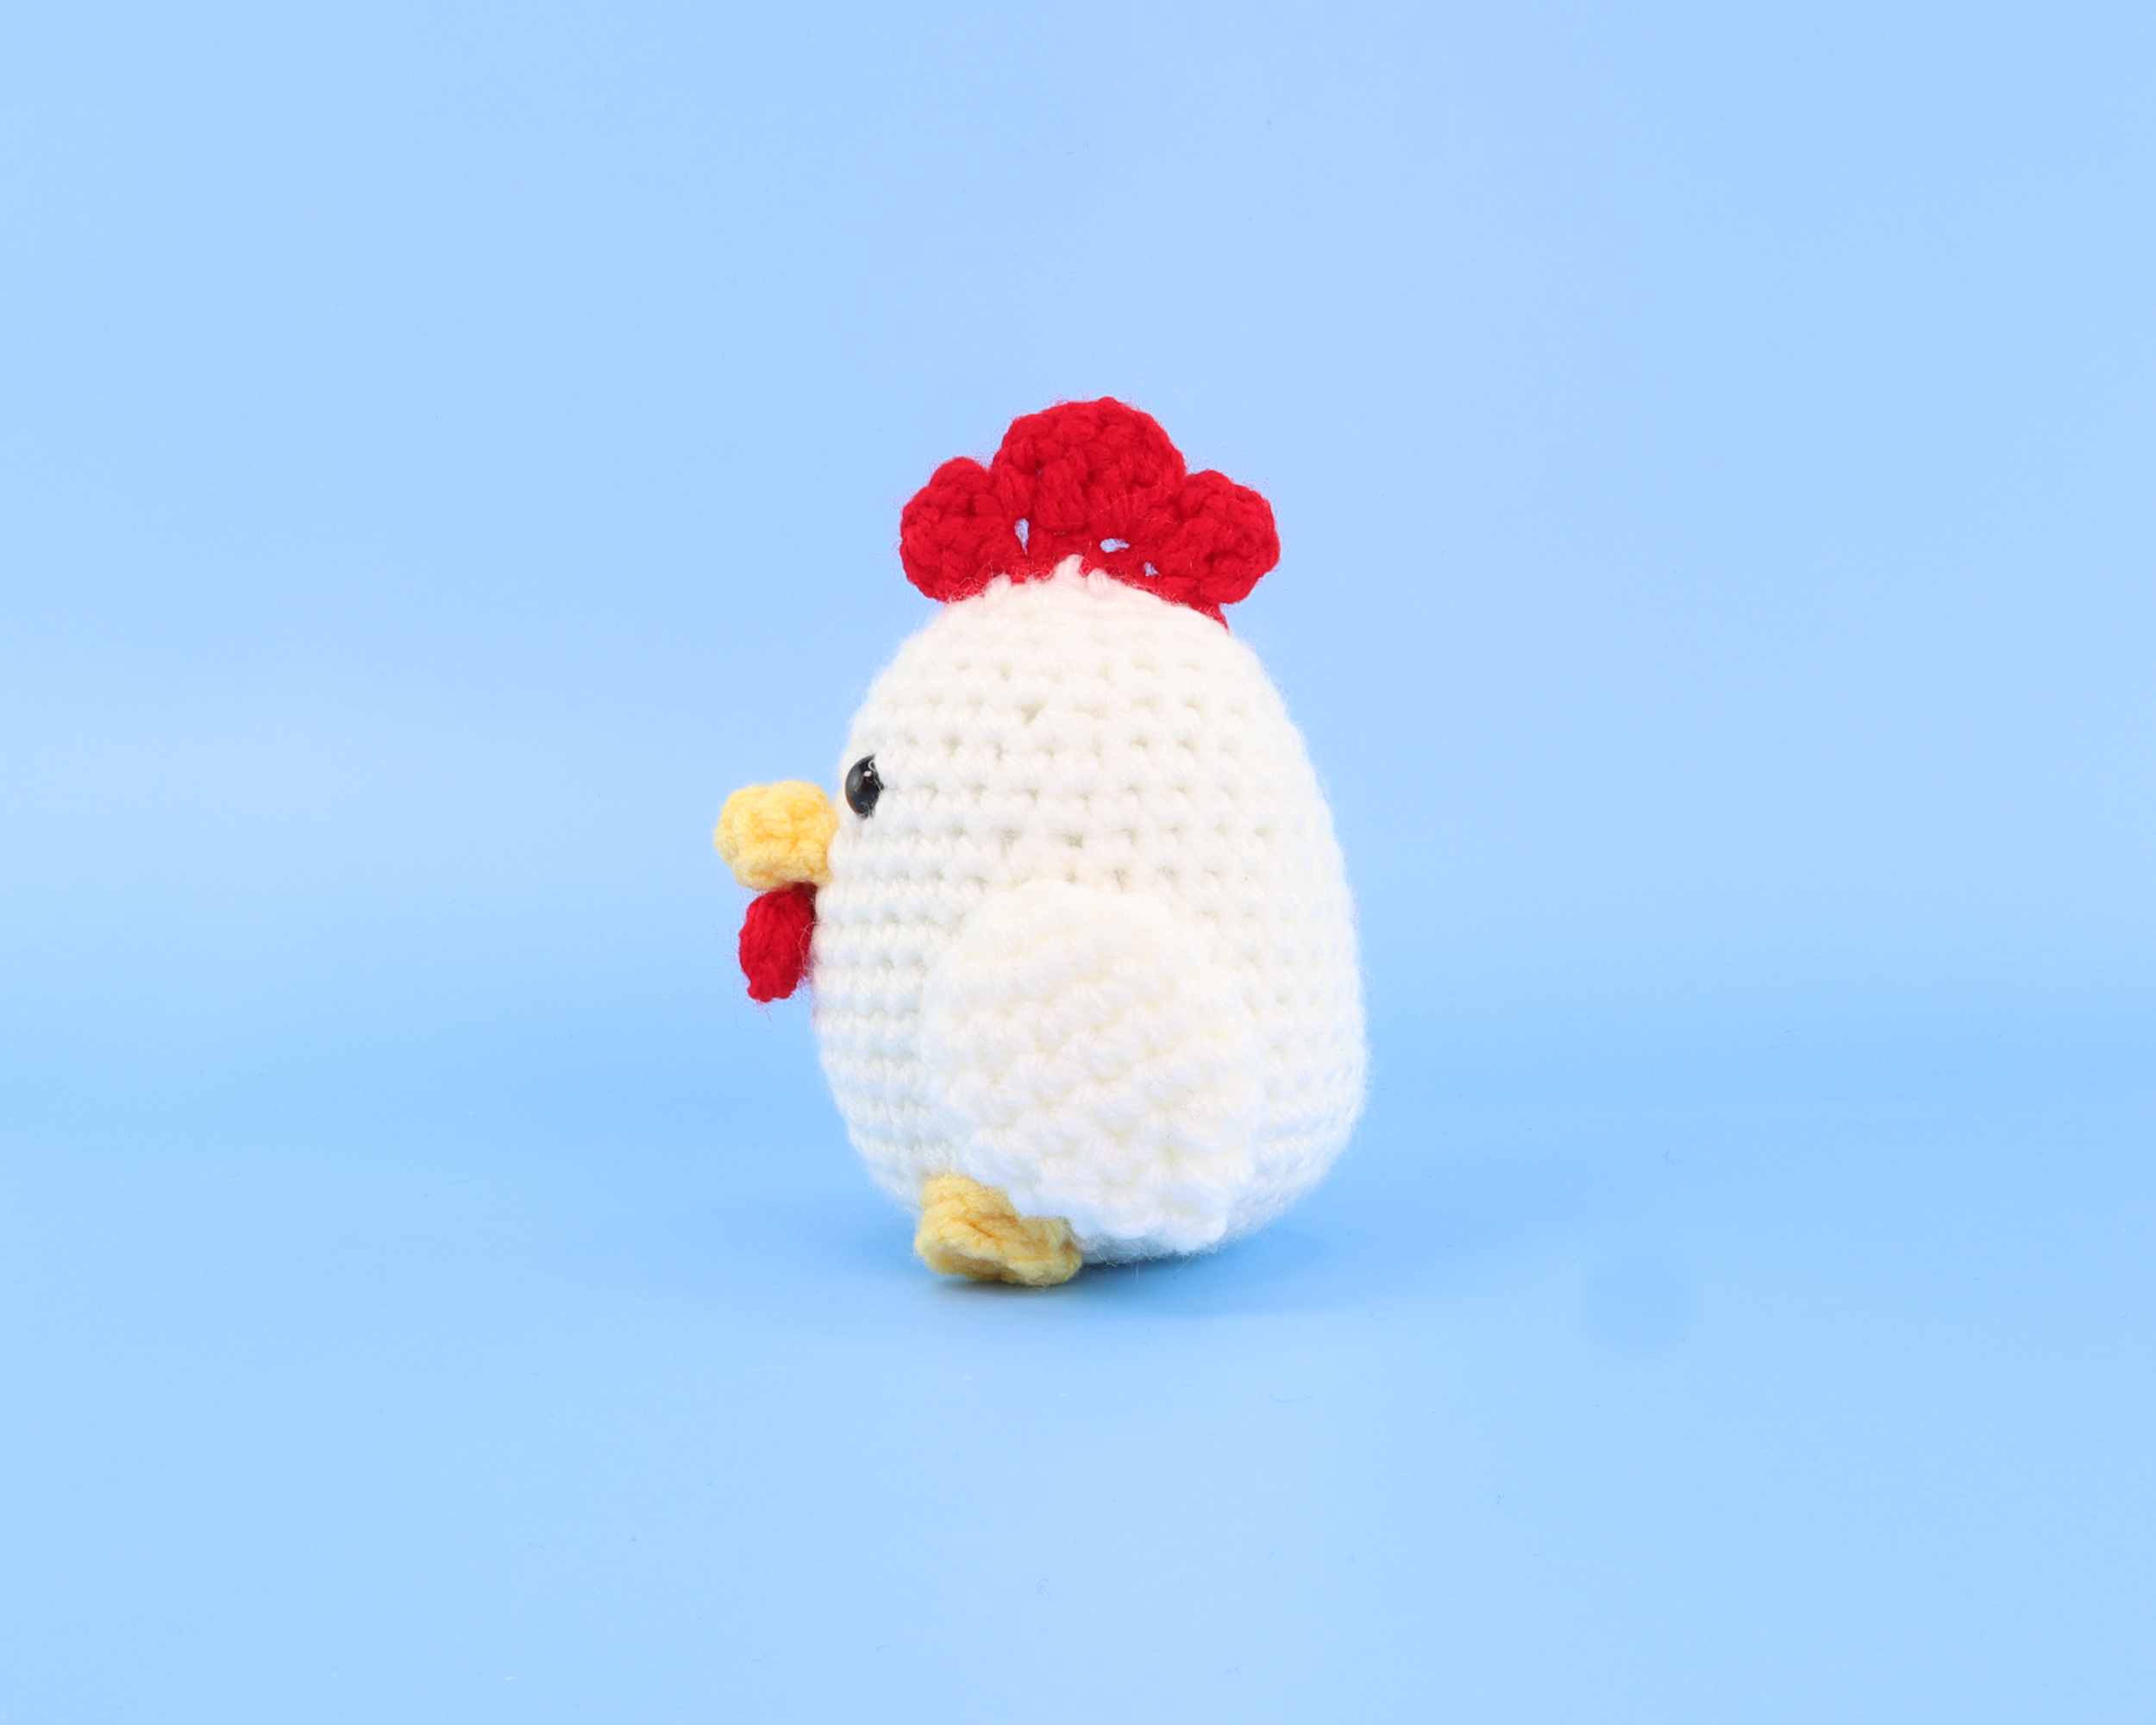 Kenny The Rooster Crochet Kit